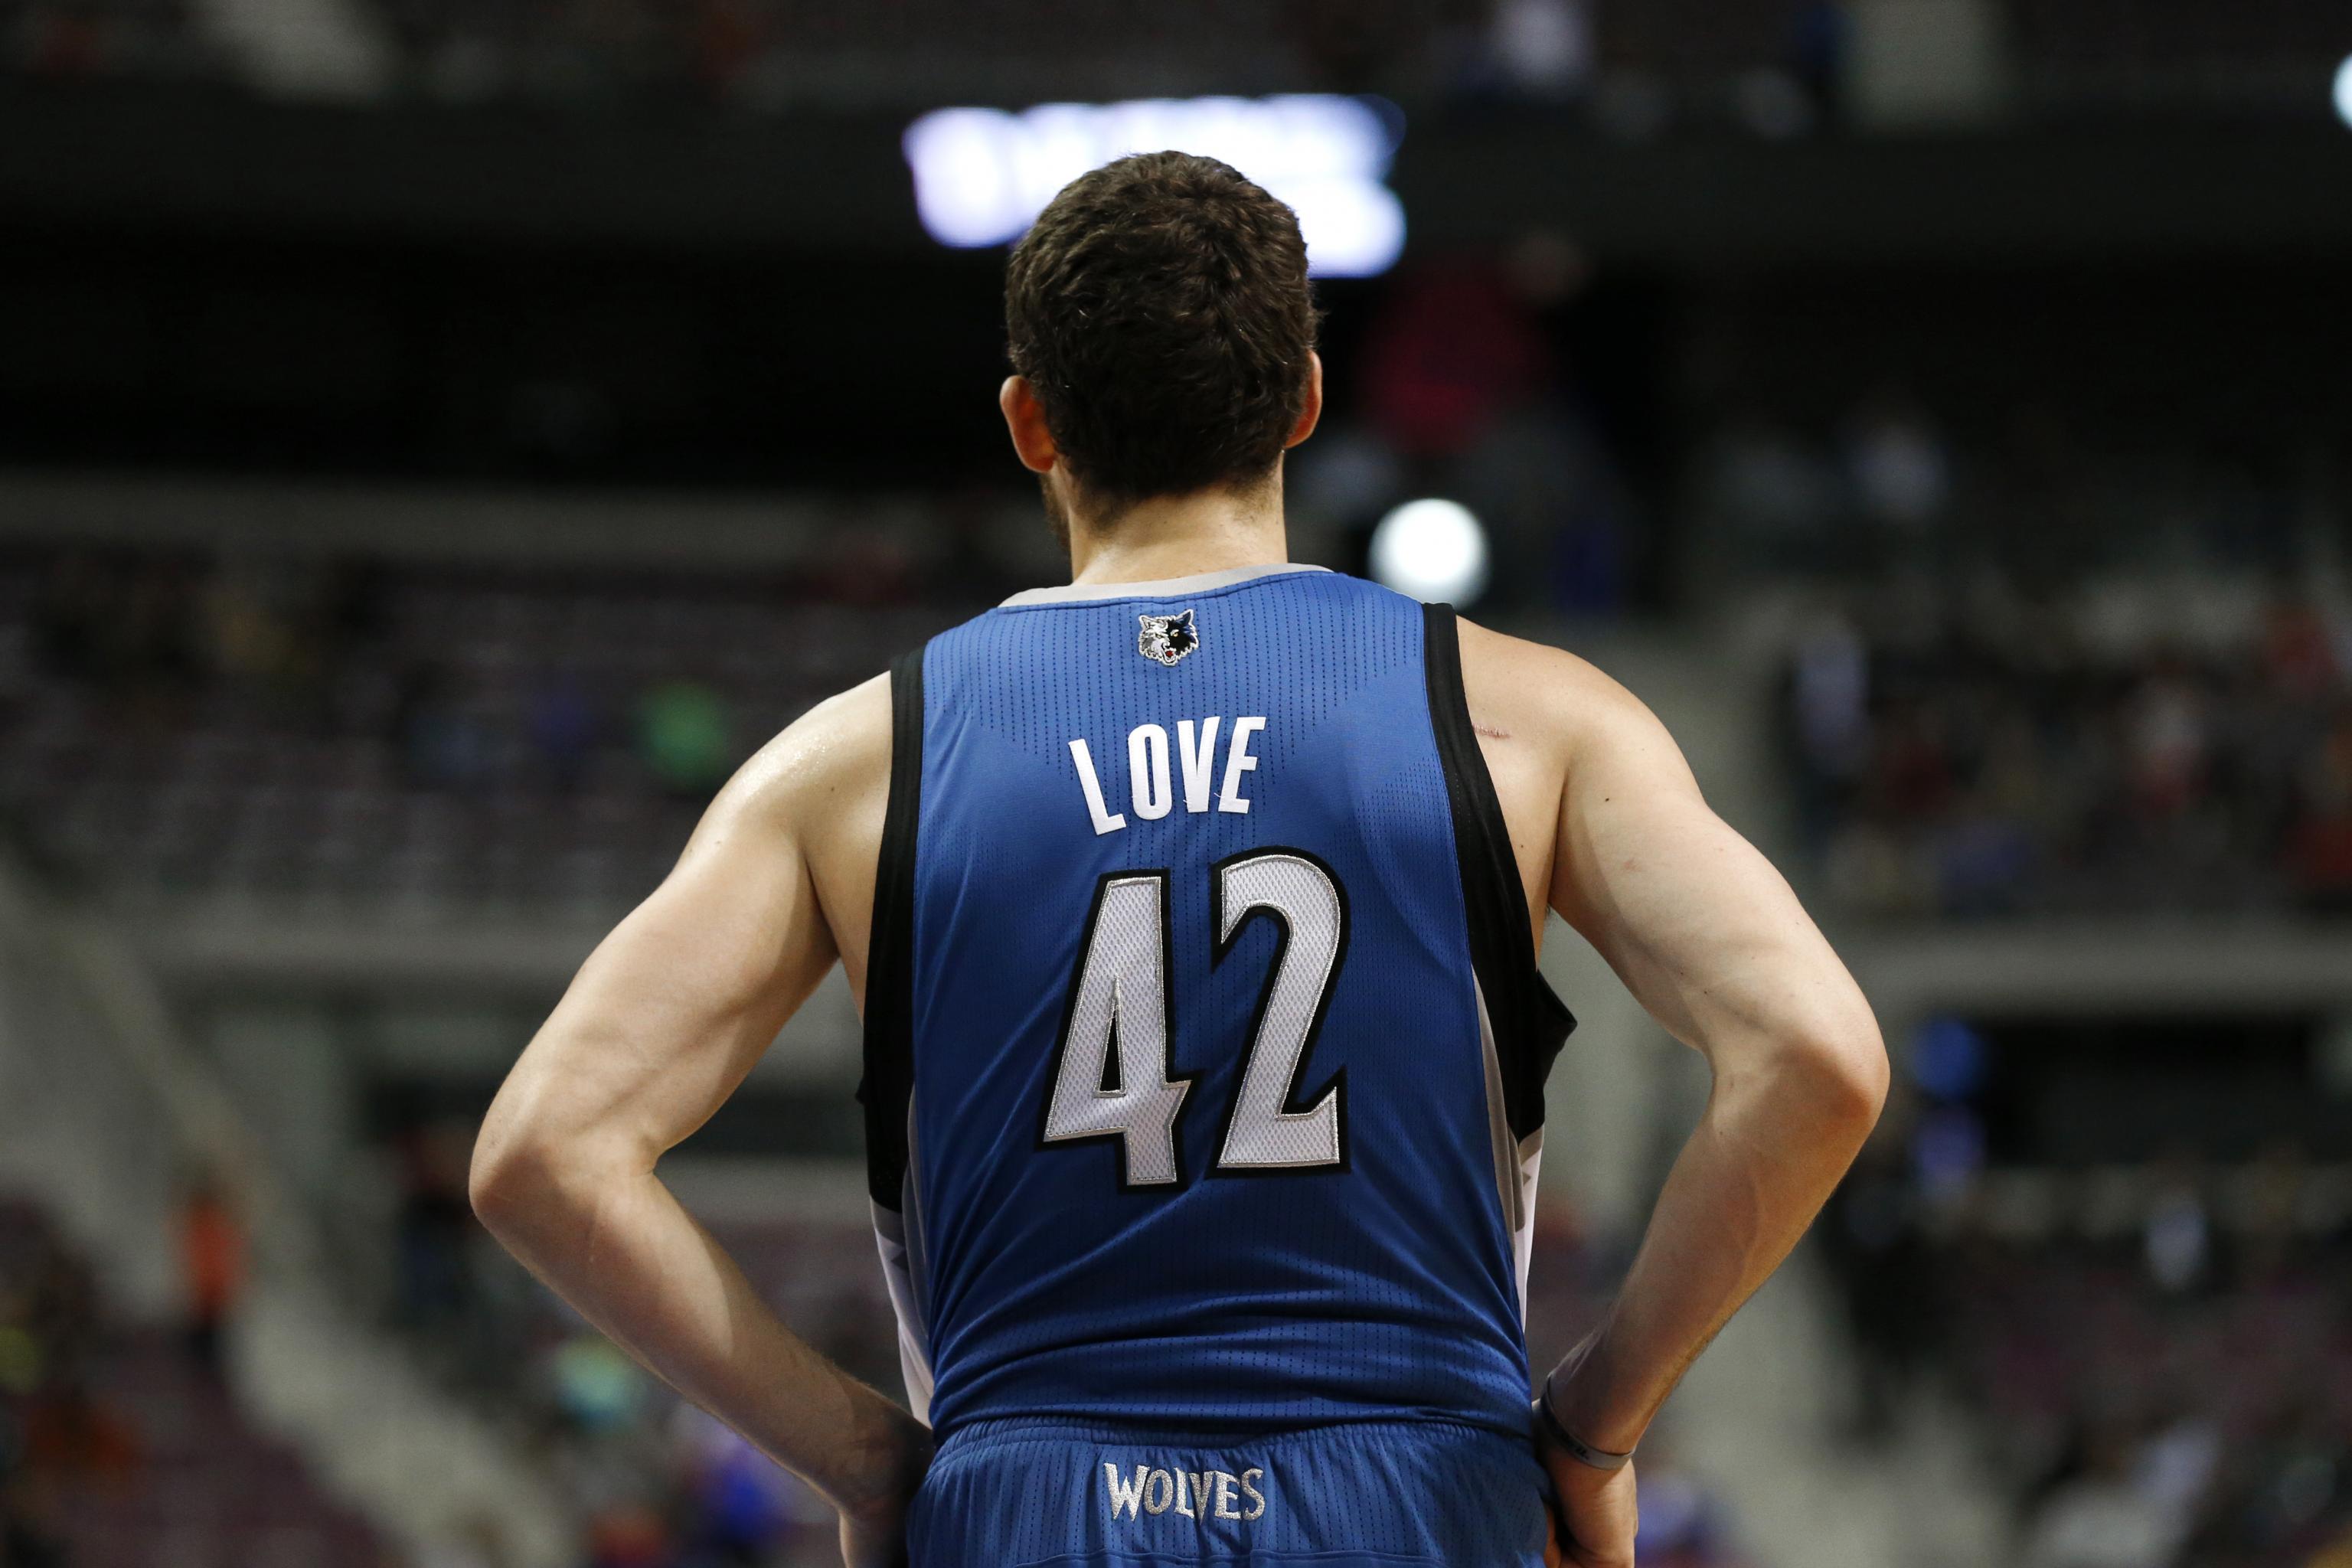 Kevin Love Named to 2013-14 All-NBA Second Team